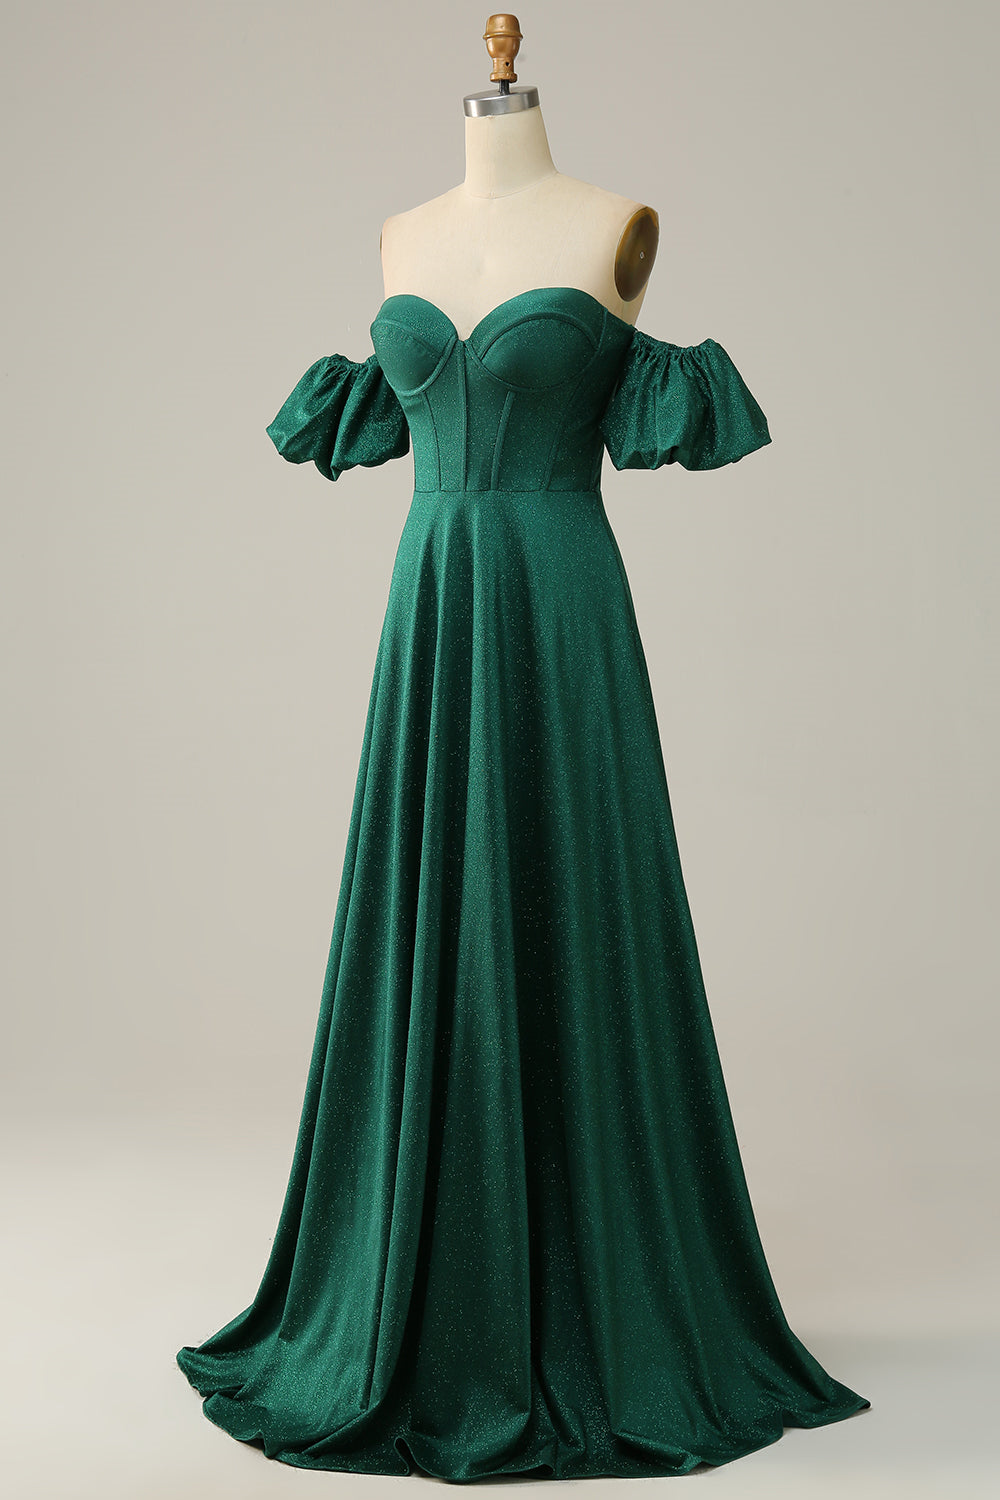 Sparkly Hunter Green Off-the-Shoulder Puff Sleeves A-line Long Prom Dress